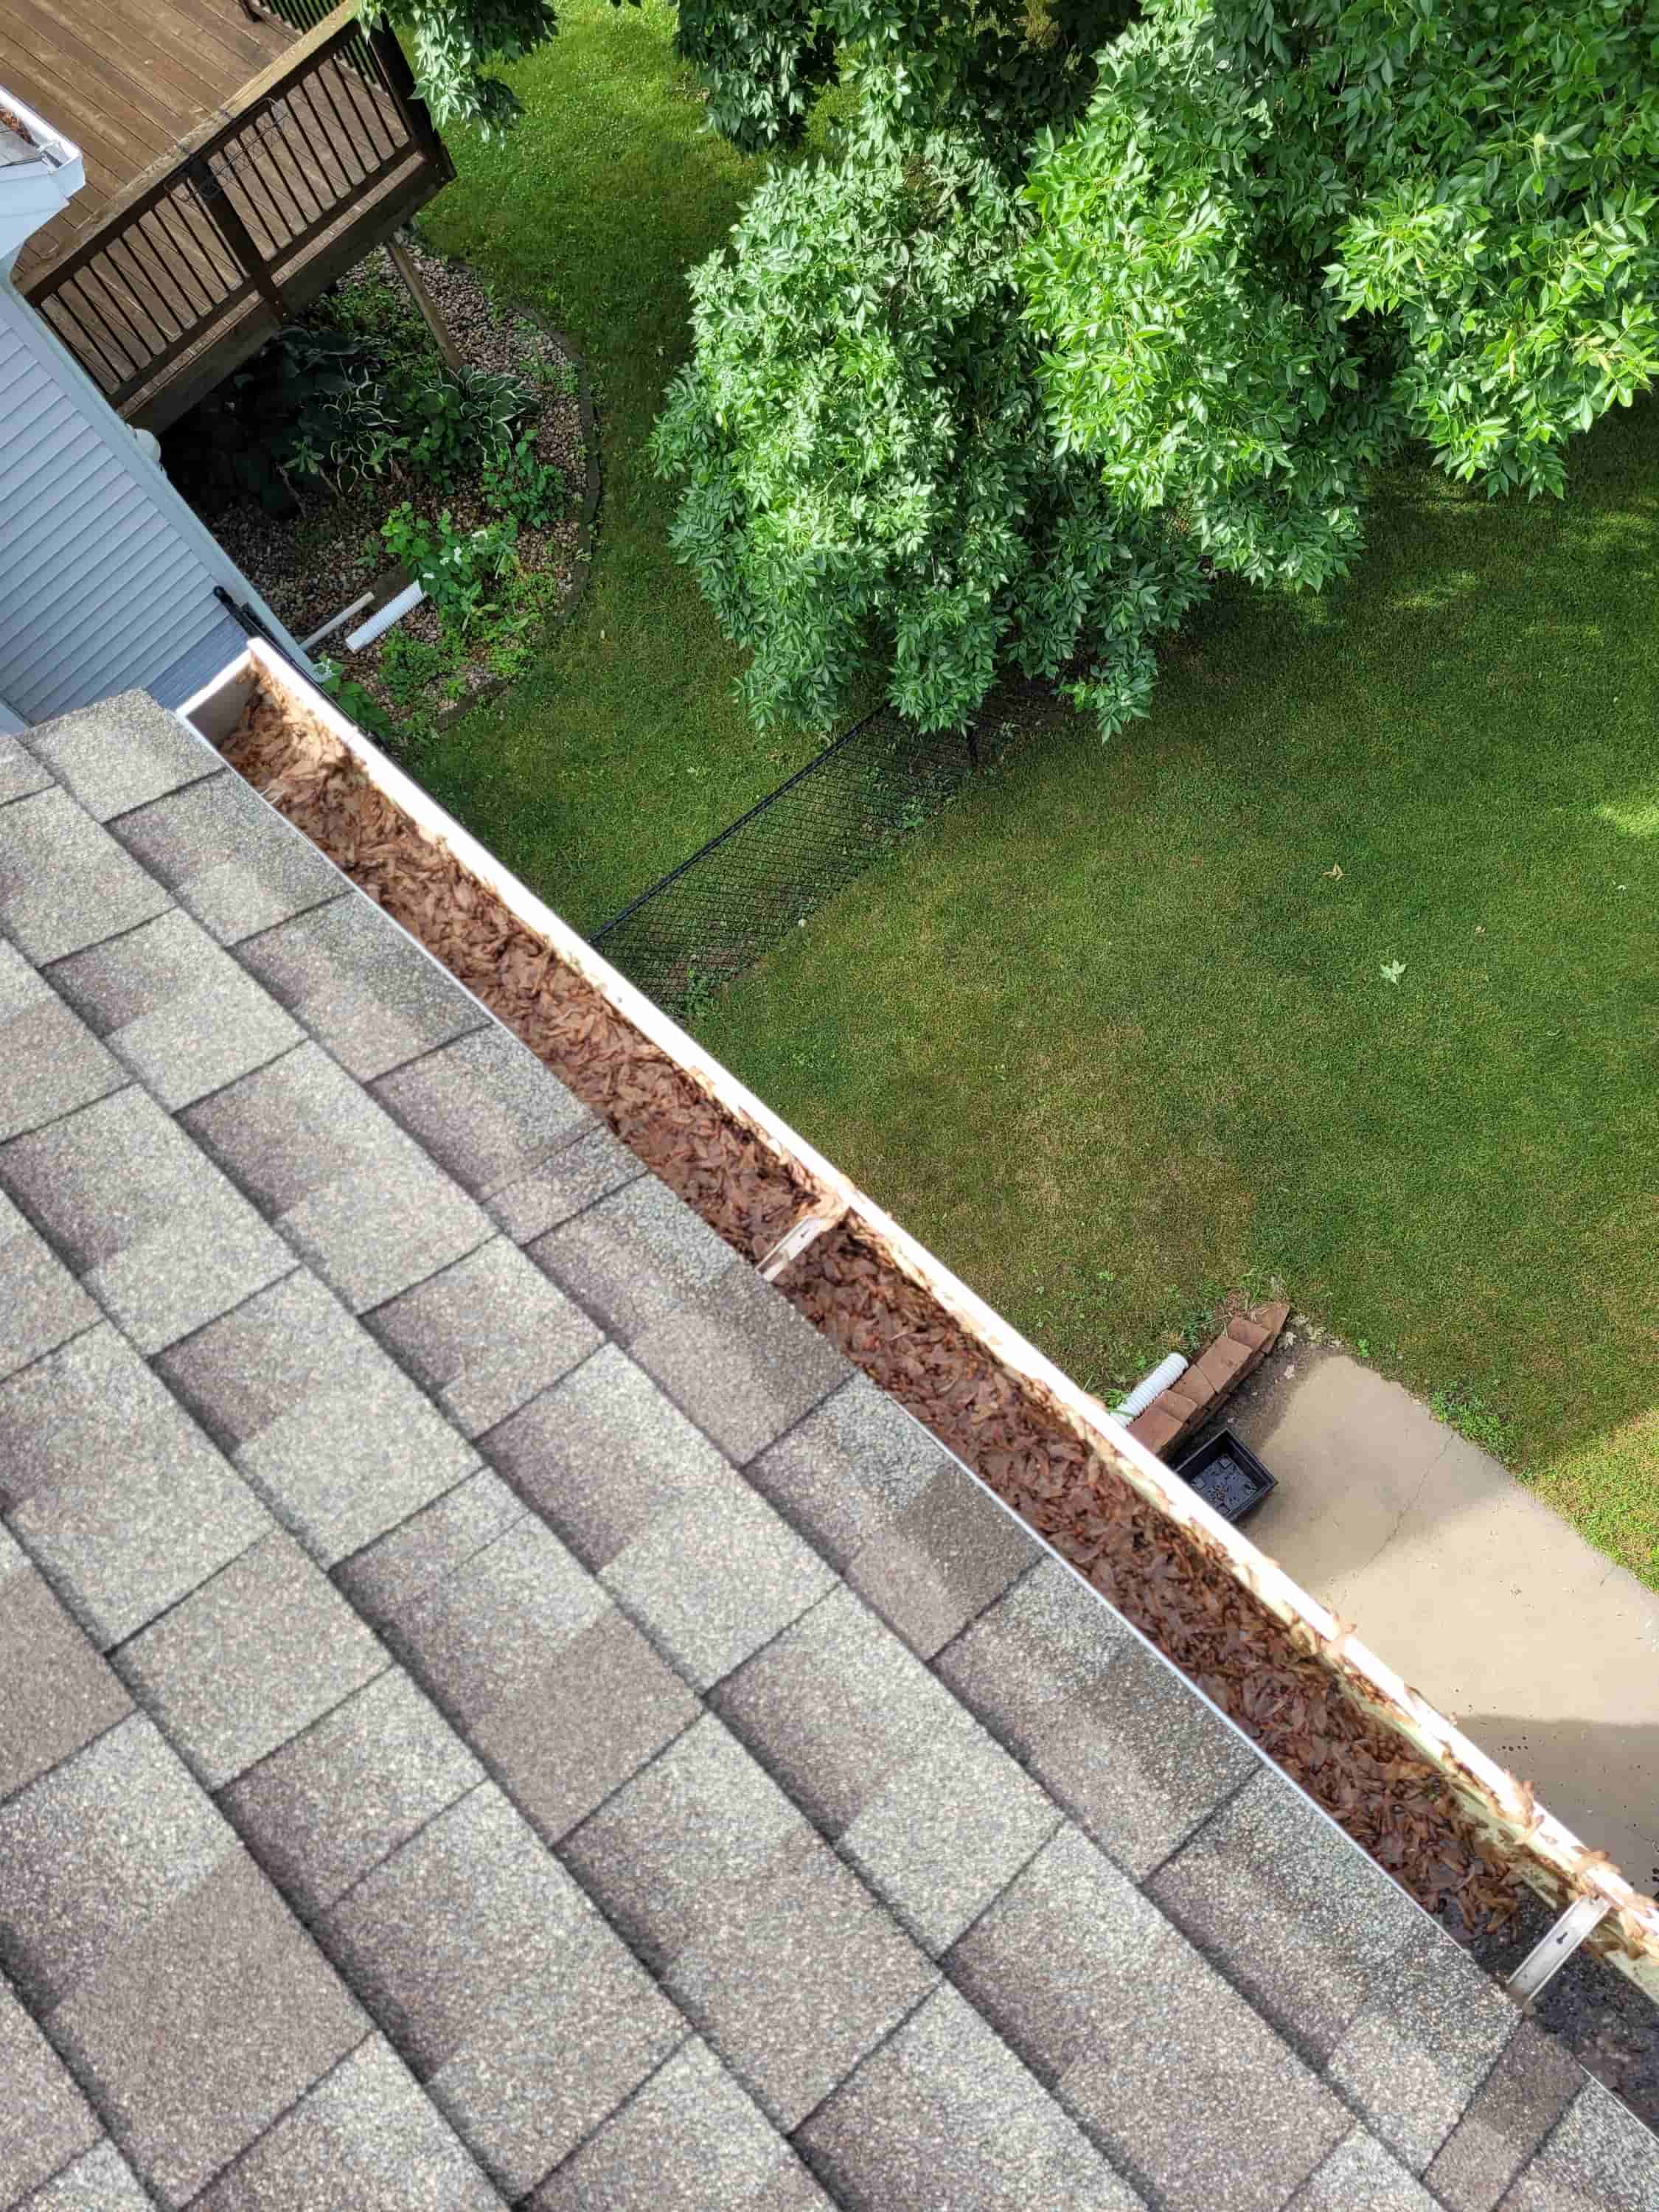 tools to clean gutters on roof